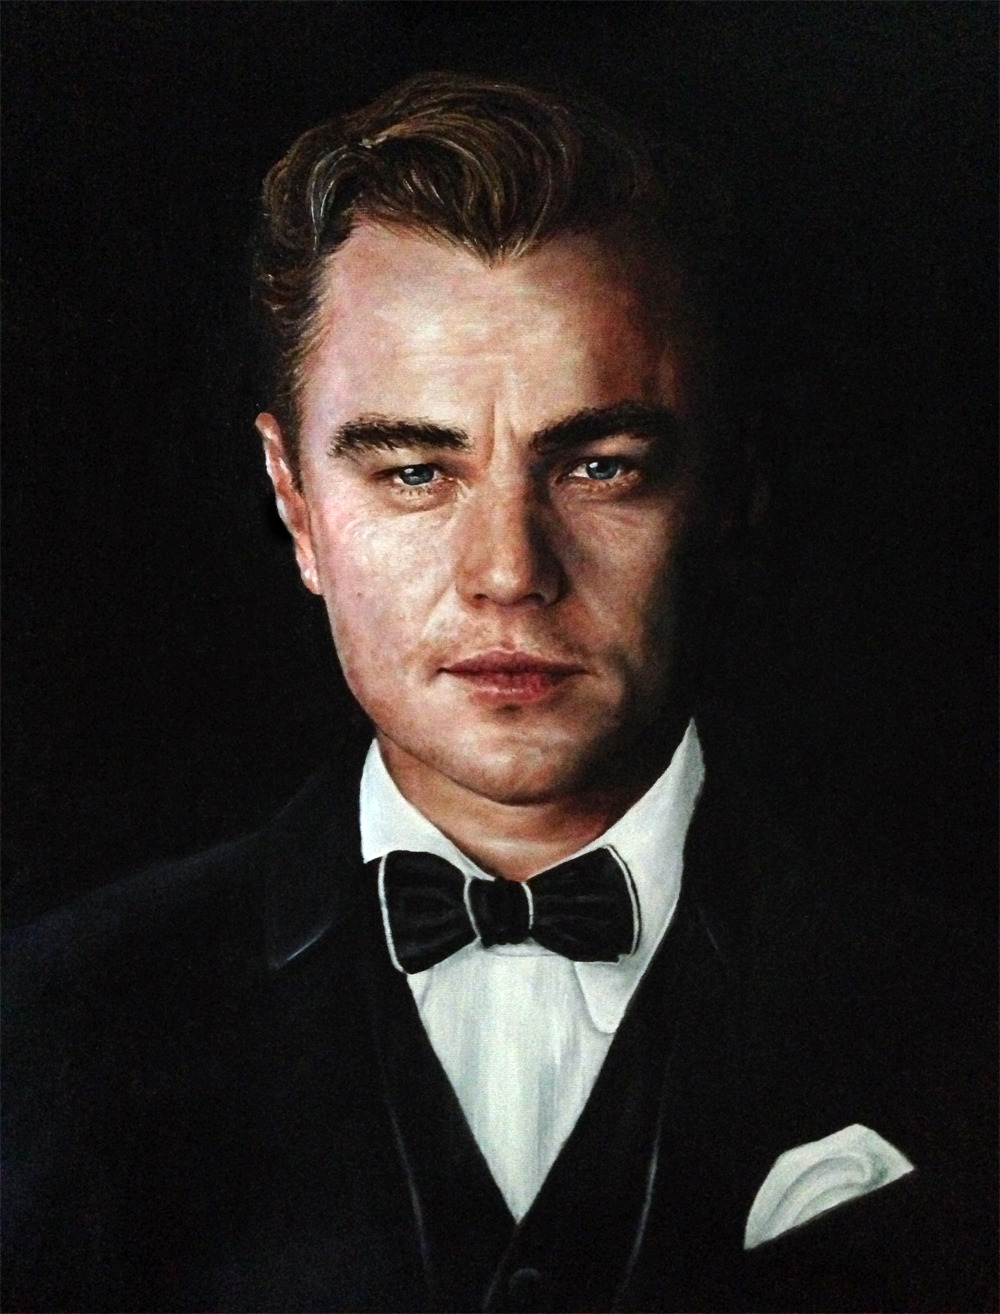 Desperate Icons: Oil painting of Leonardo DiCaprio as Jay Gatsby.